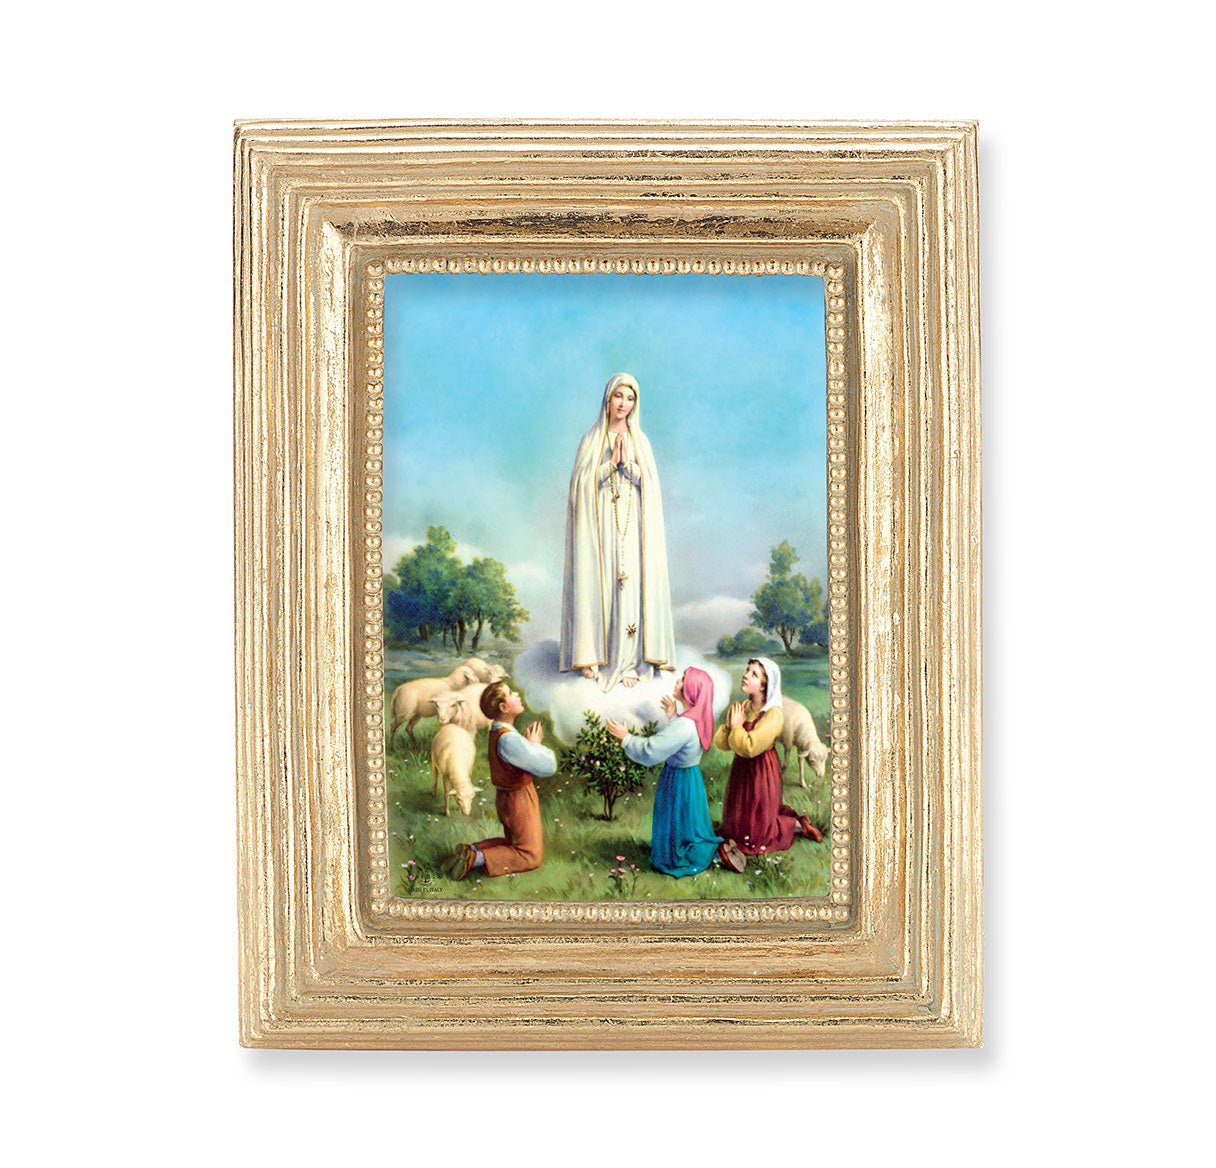 Our Lady of Fatima Gold Framed Print